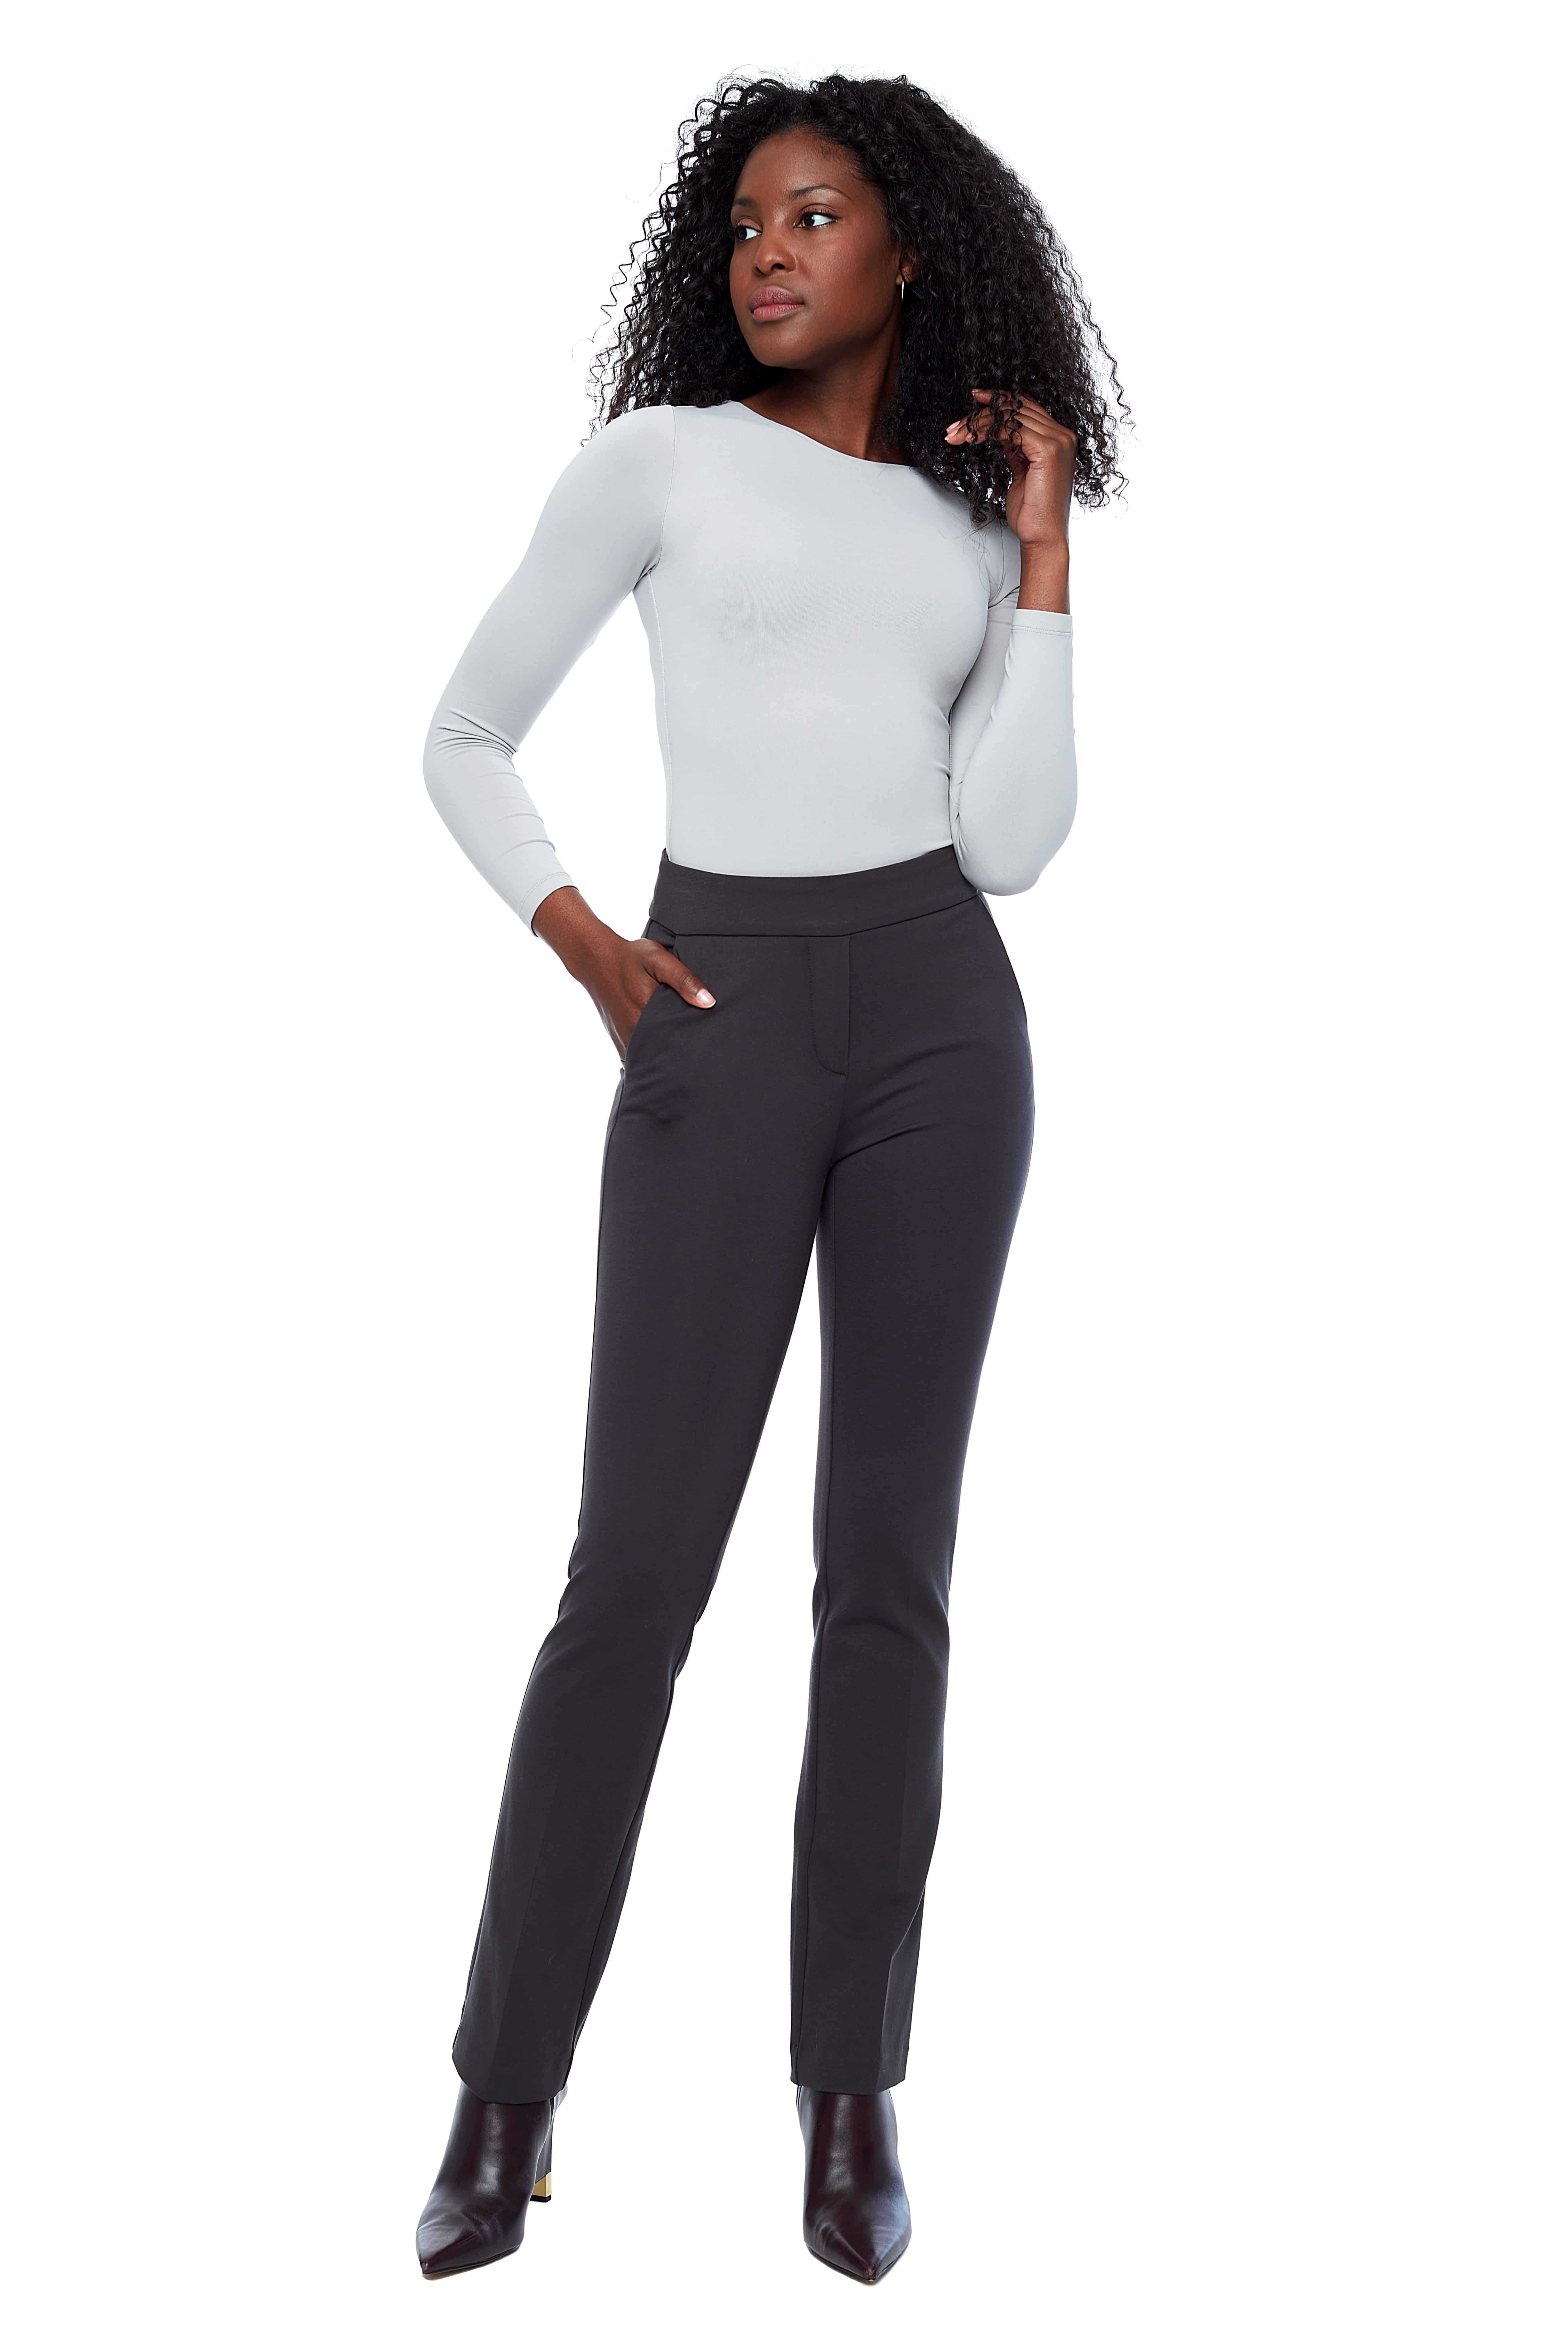 DKR PTP-3 HIGH RISE High Rise Stretch Ponte Pant with Side Zipper